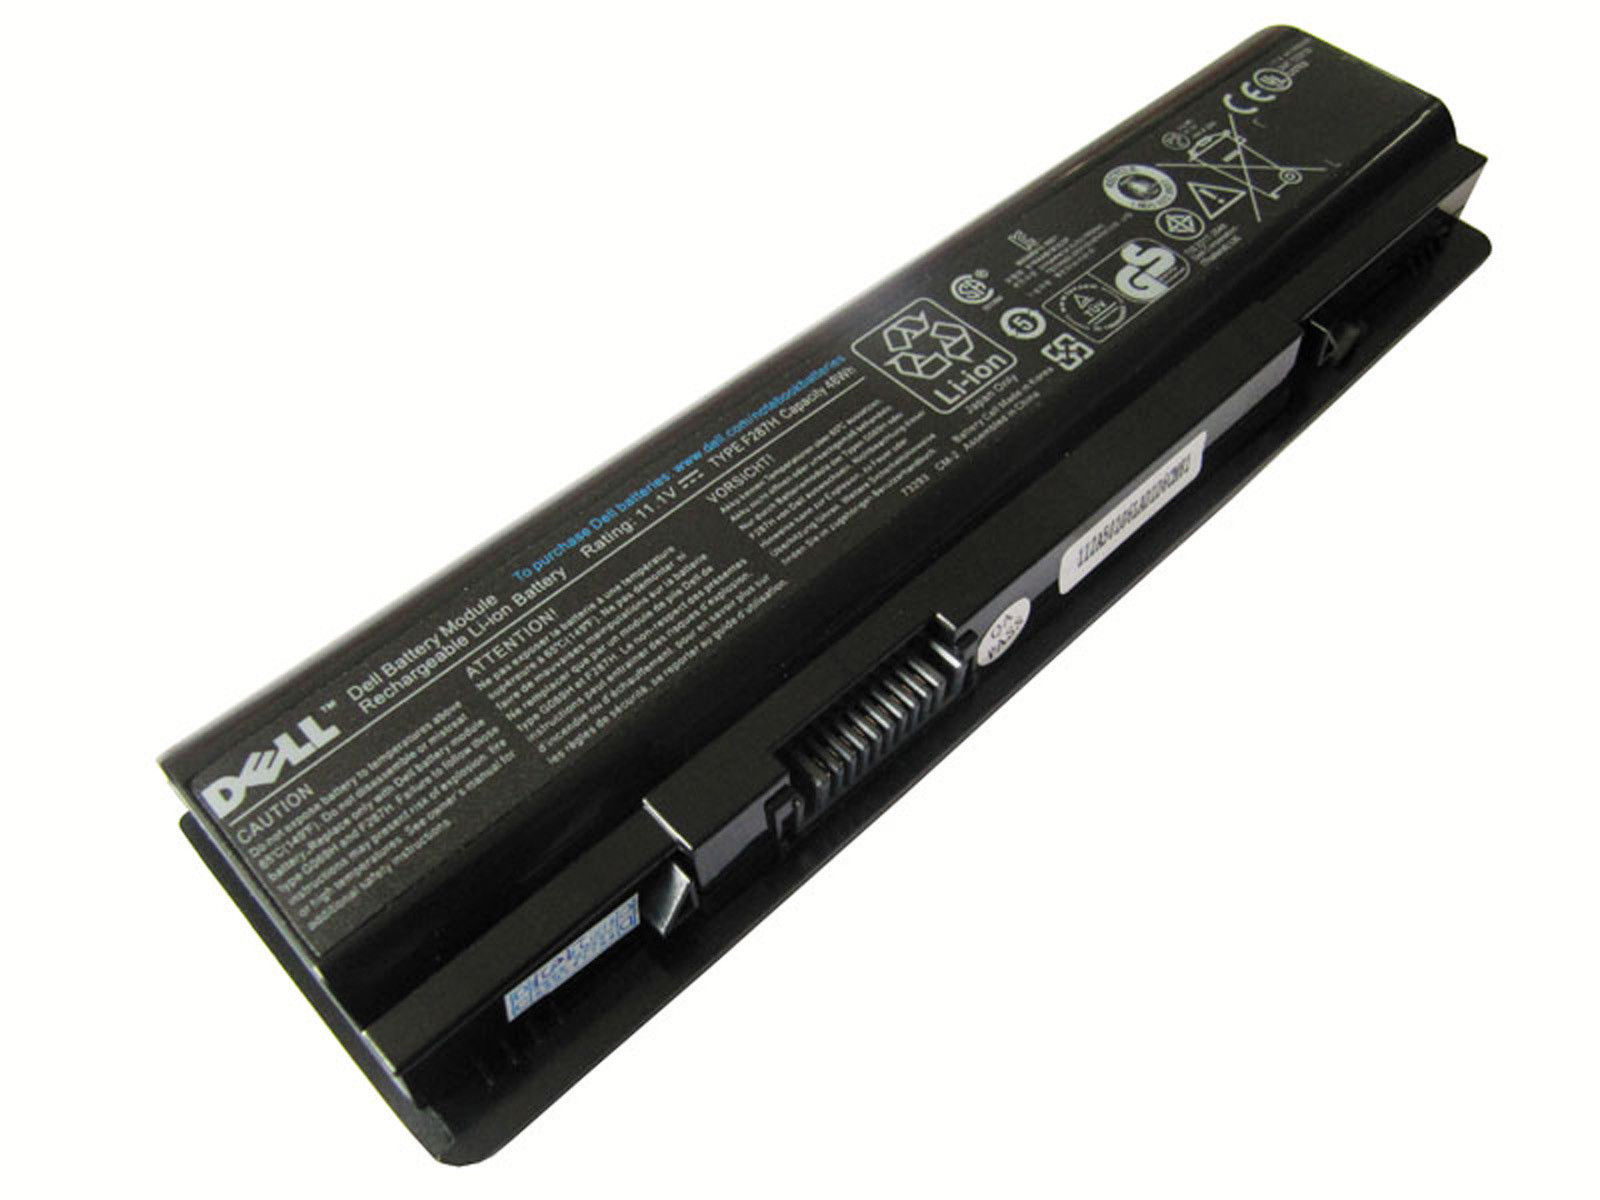 /img/product/pin-dell-inspiron-1410-vostro-a840-a860-1088-1014n-1015-saclaptop-1.jpeg